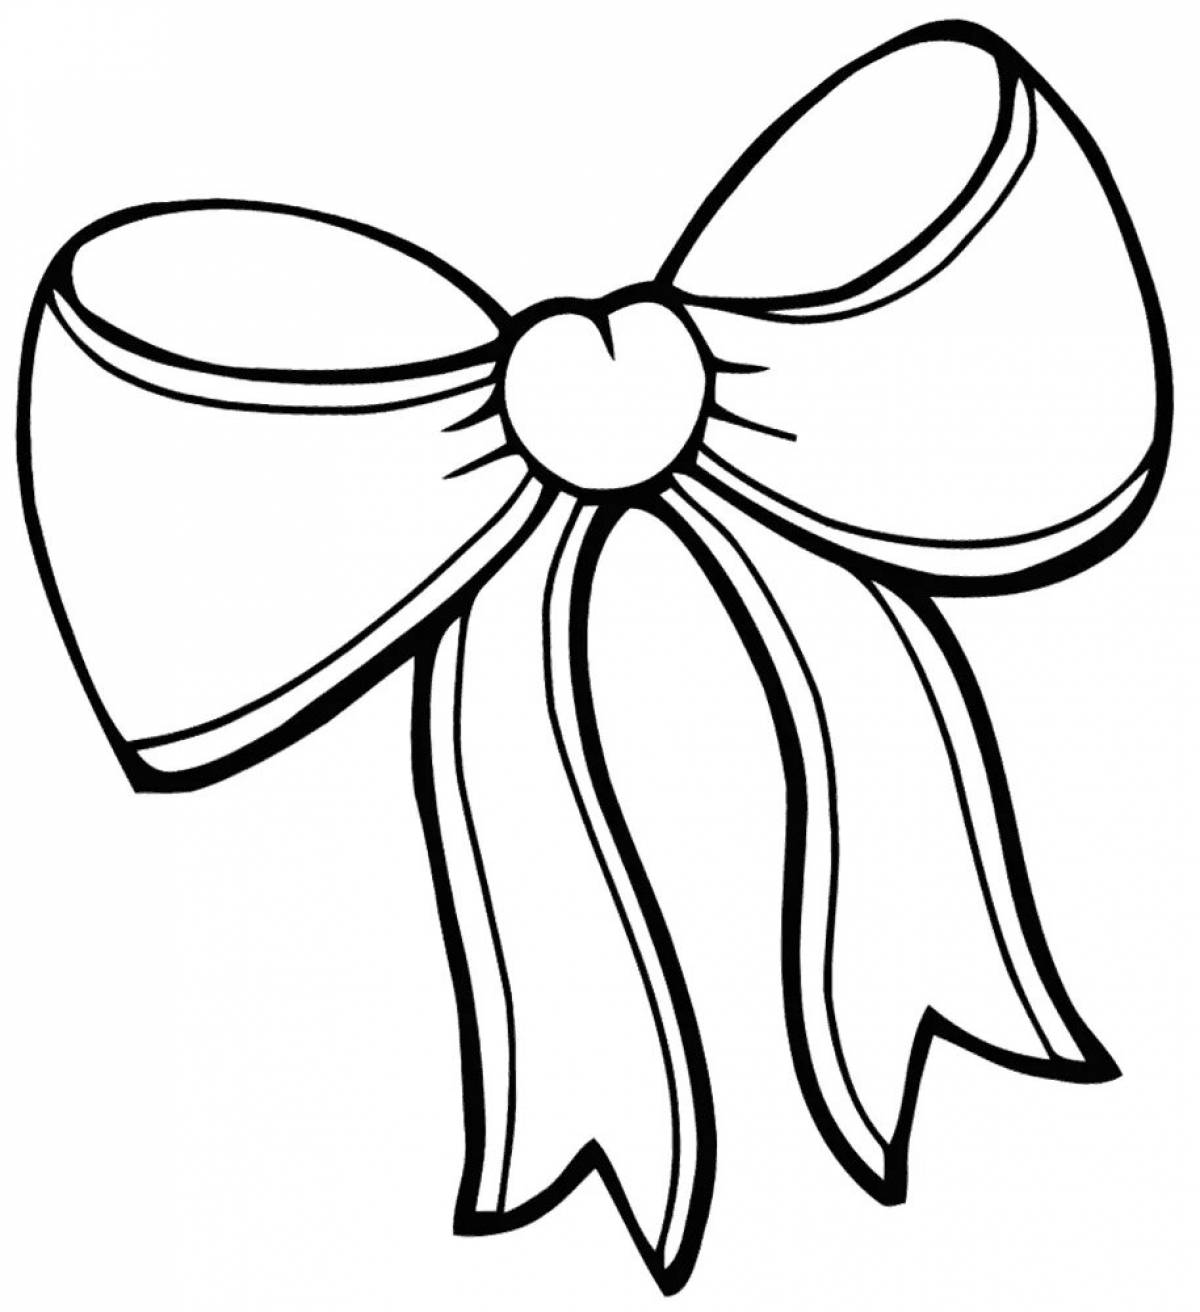 Coloring page bow for preschoolers